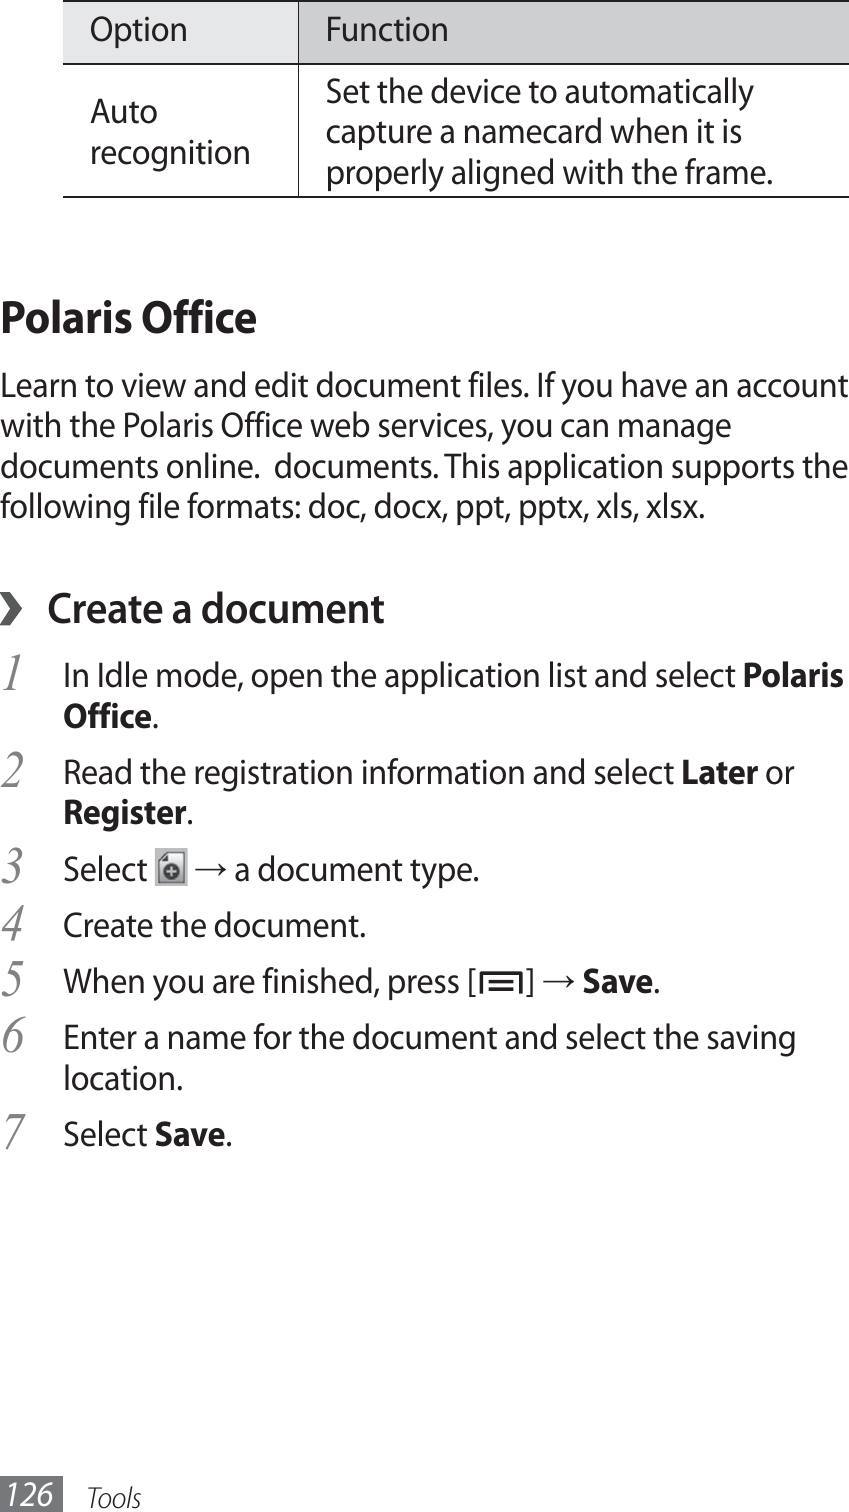 Tools126Option FunctionAuto recognitionSet the device to automatically capture a namecard when it is properly aligned with the frame.Polaris OfficeLearn to view and edit document files. If you have an account with the Polaris Office web services, you can manage documents online.  documents. This application supports the following file formats: doc, docx, ppt, pptx, xls, xlsx.Create a document ›In Idle mode, open the application list and select 1 Polaris Office.Read the registration information and select 2 Later or Register.Select 3  → a document type.Create the document.4 When you are finished, press [5 ] → Save. Enter a name for the document and select the saving 6 location.Select 7 Save.